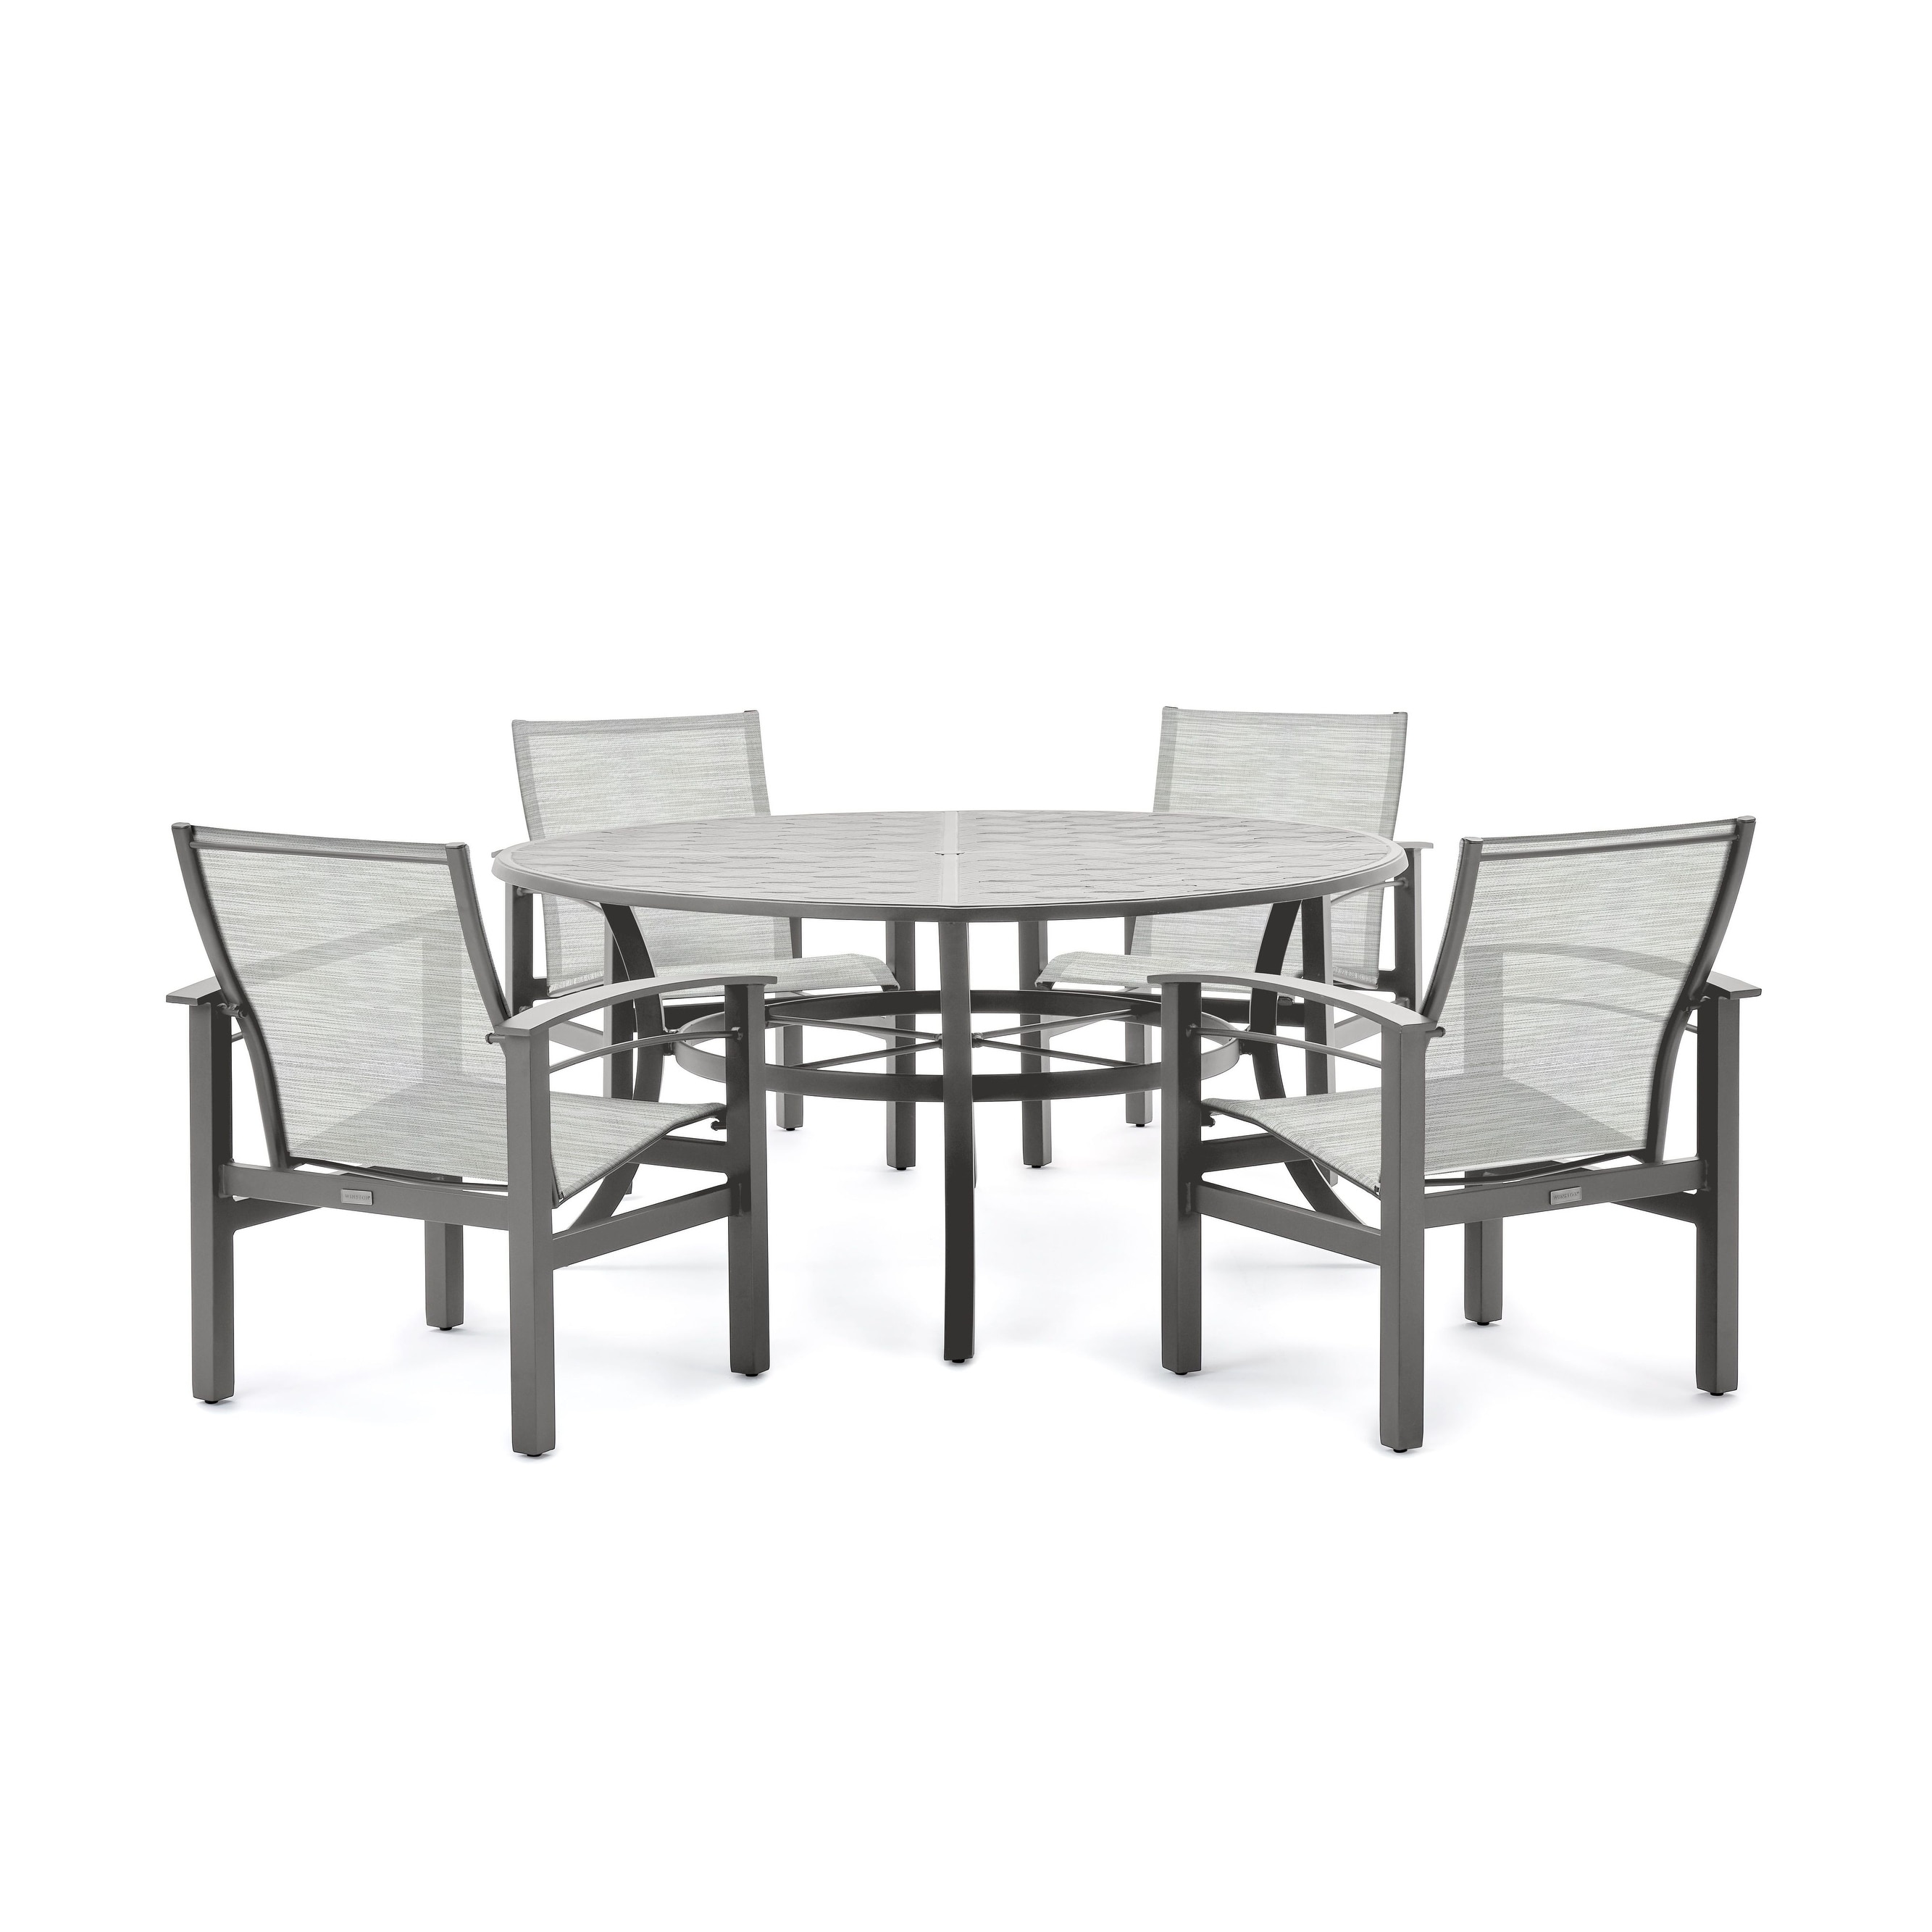 Stanford Sling 5pc Dining Set (4 Chairs  Round Table)